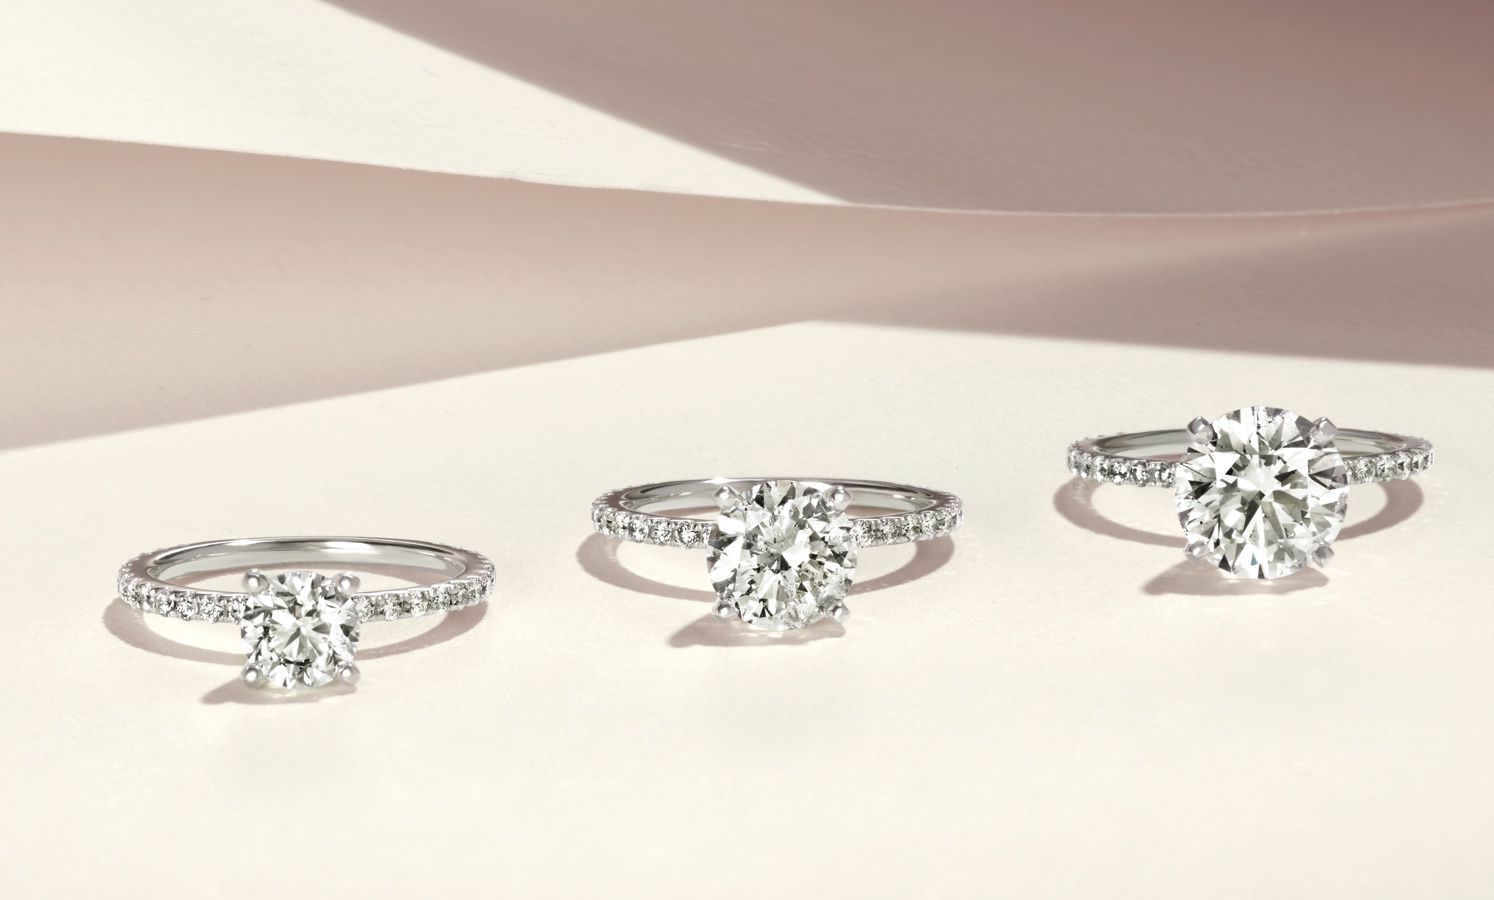 A collection of diamond engagement rings with different center stone sizes